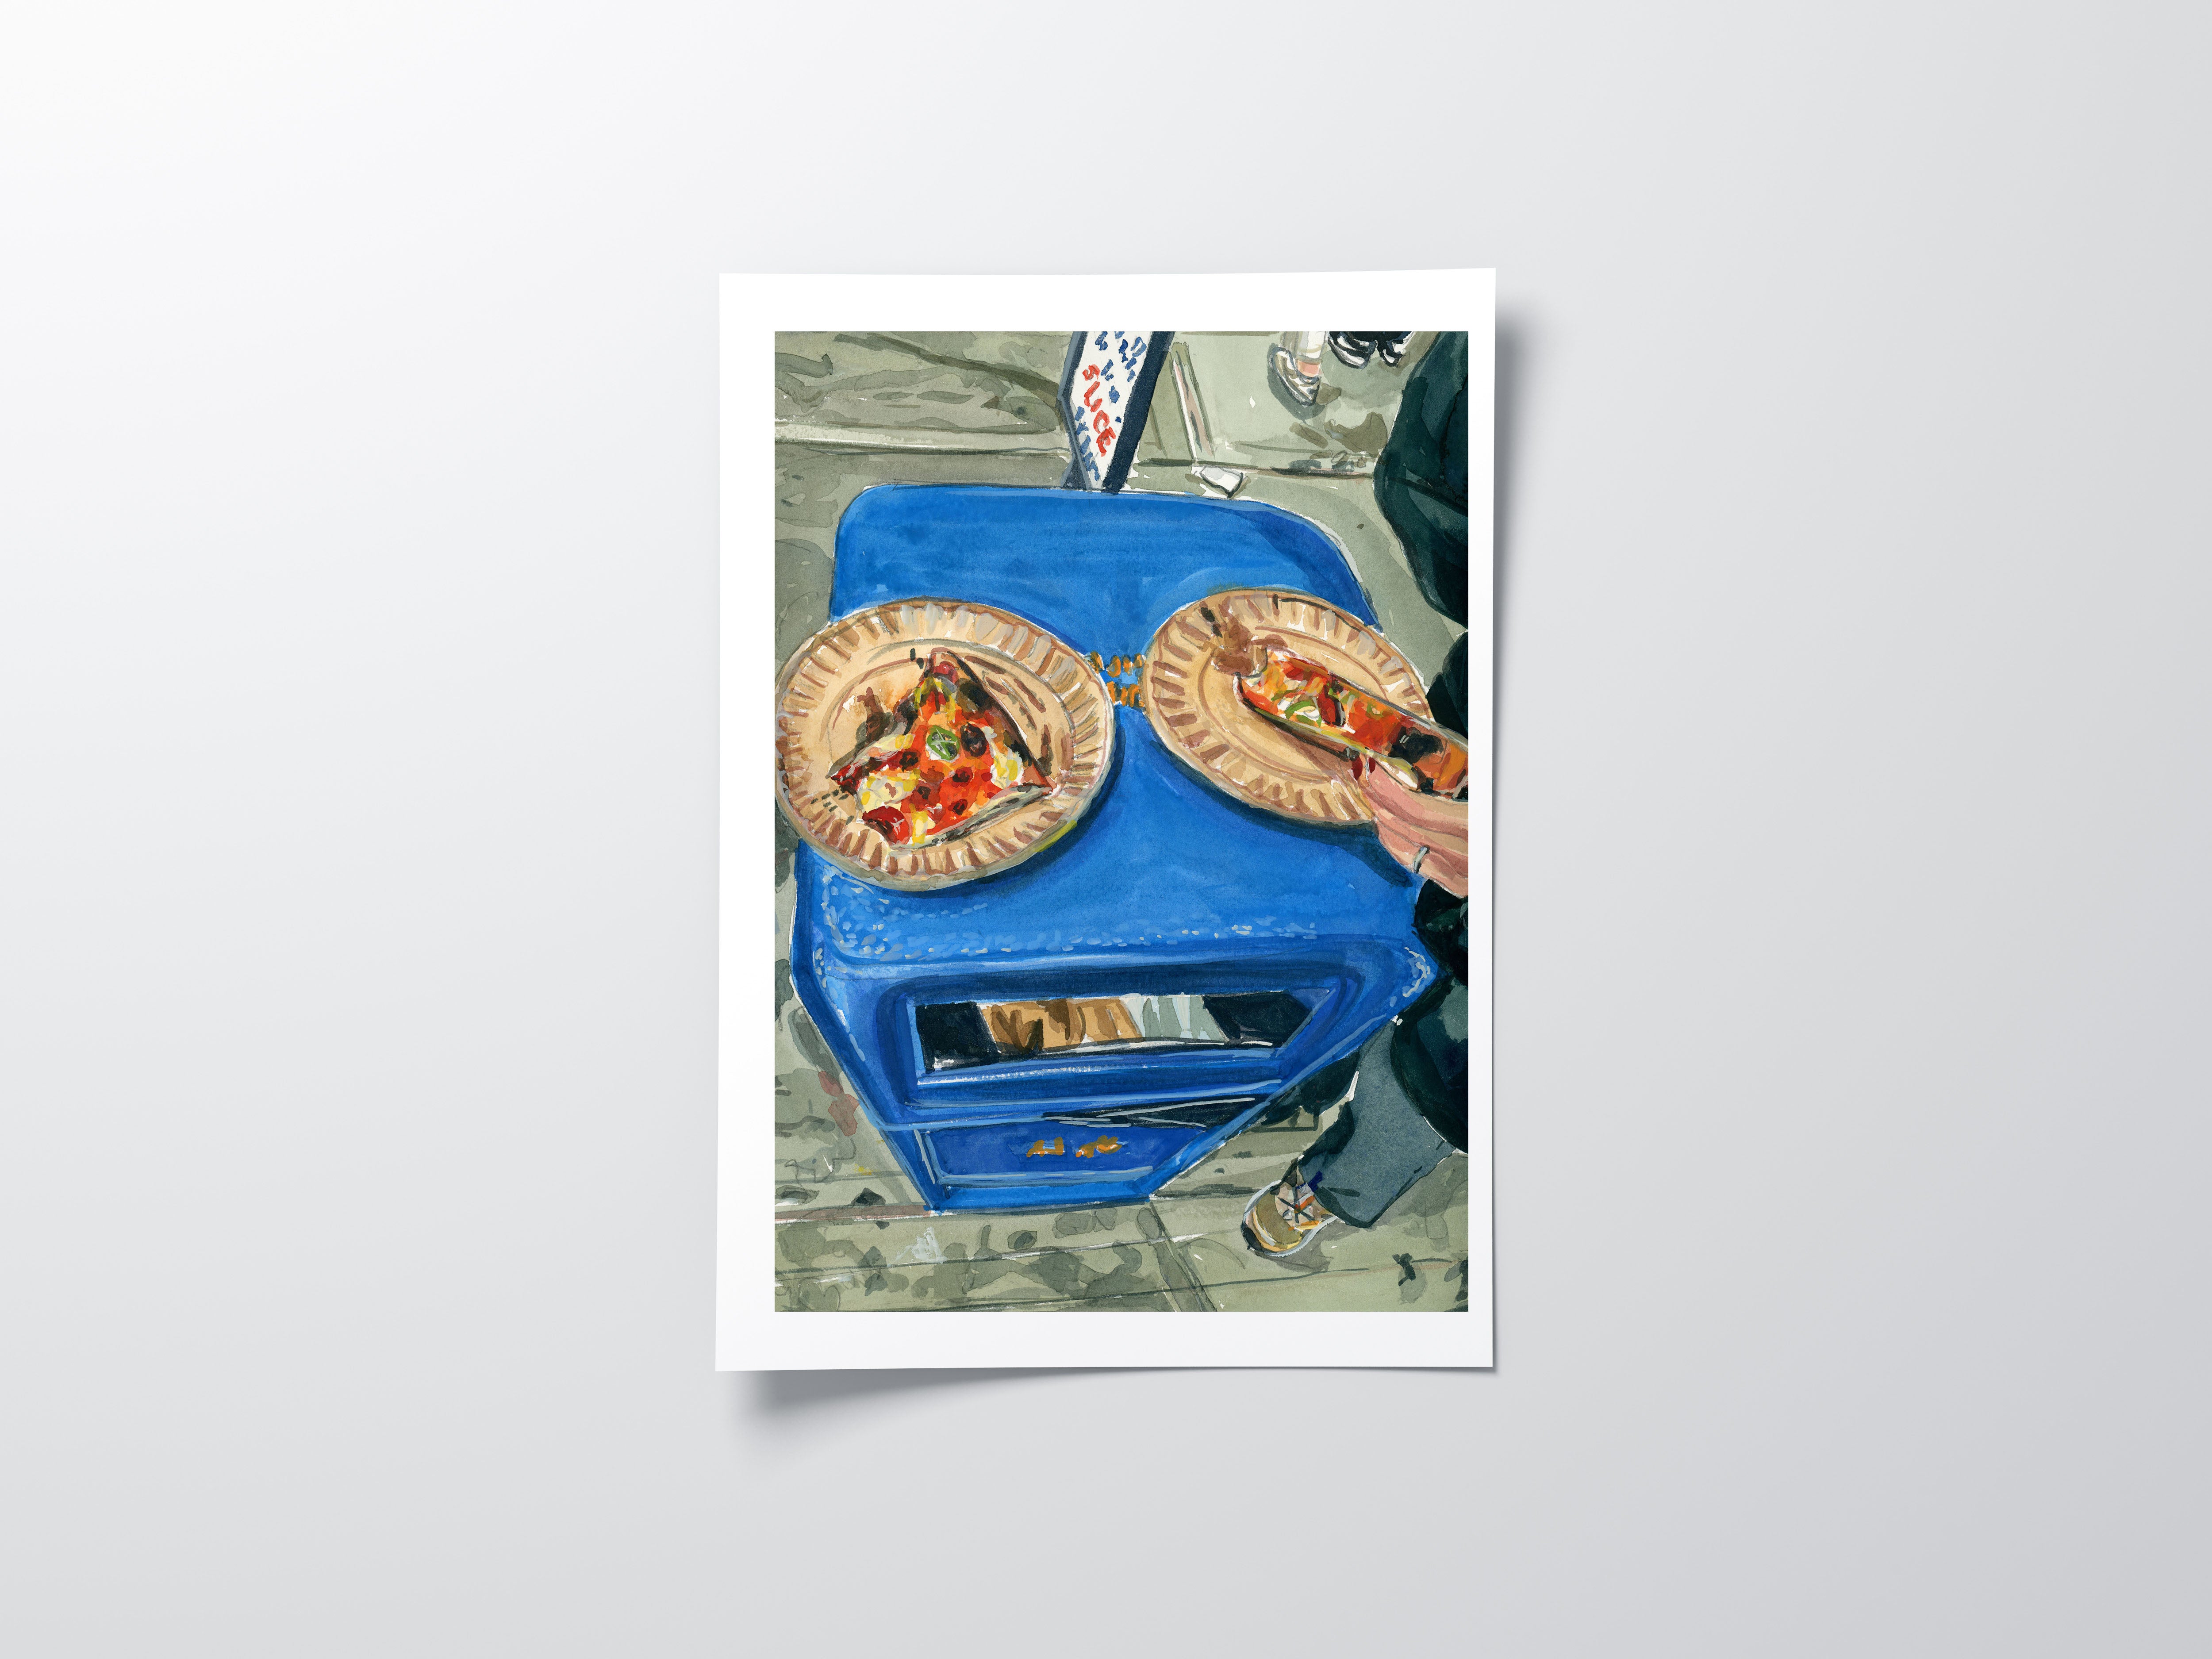 Scar’s Pizza print of painting by Medjool Studio. Print of original gouache painting showing a slice of pizza on top of a vibrant blue garbage bin.